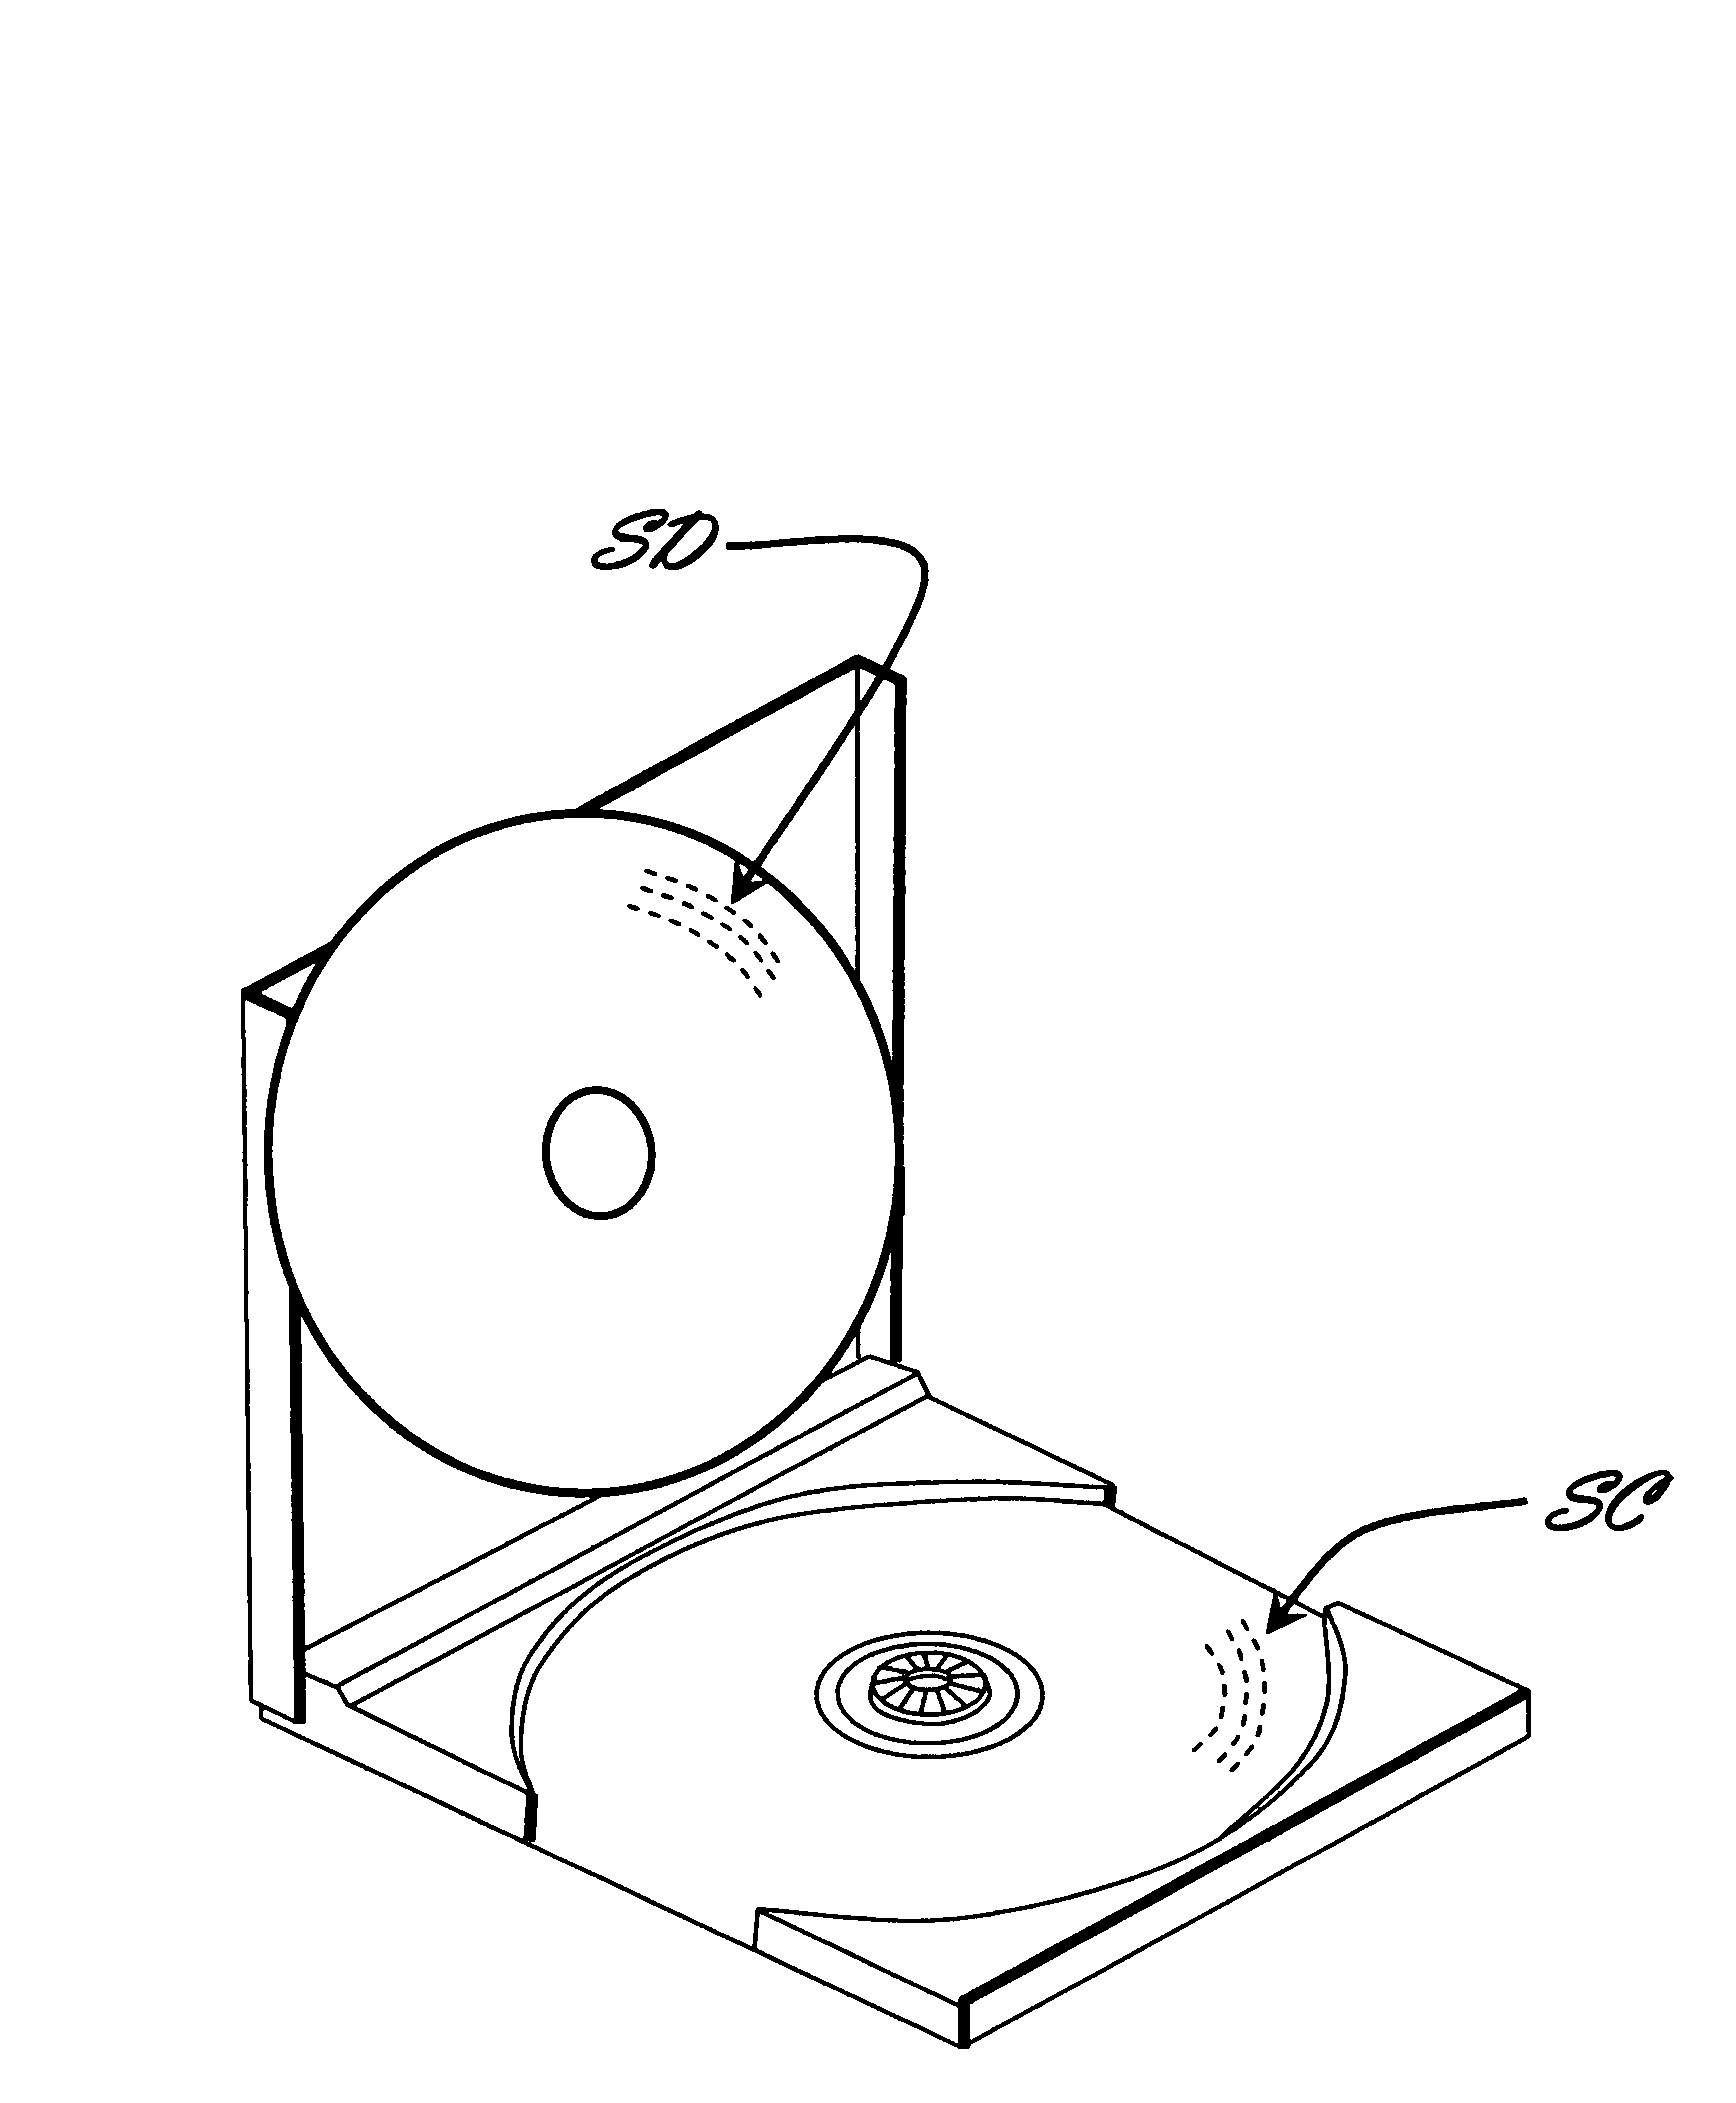 Disc protector